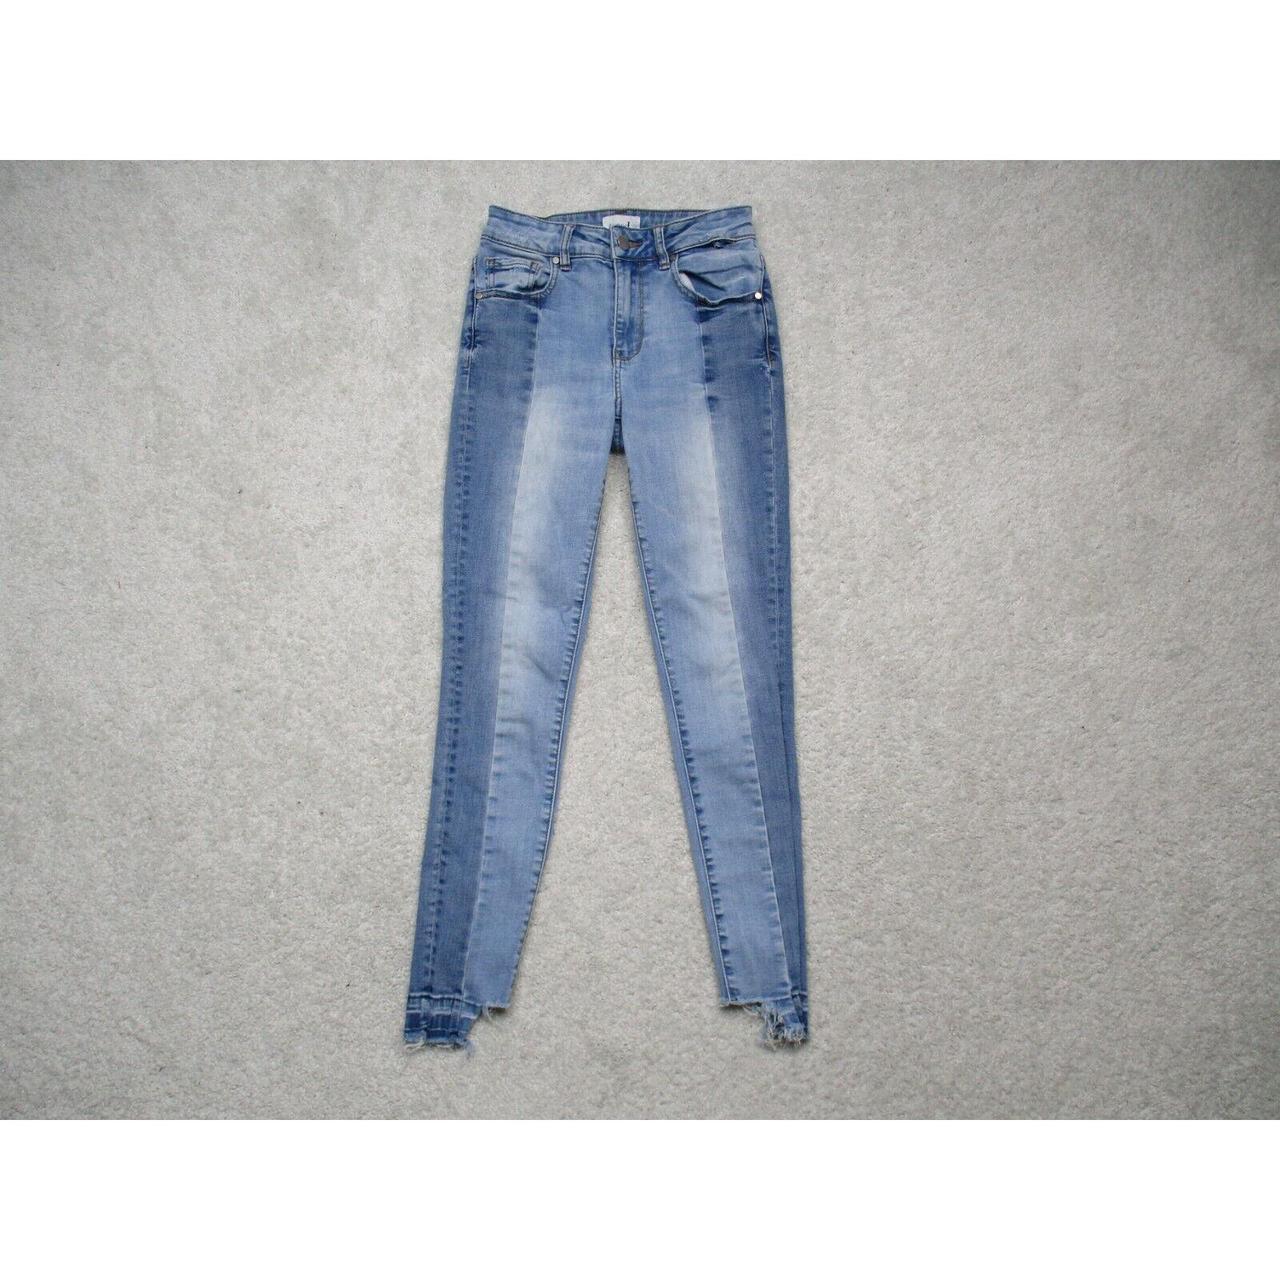 Product Image 1 - Seed Heritage Jeans Womens 22